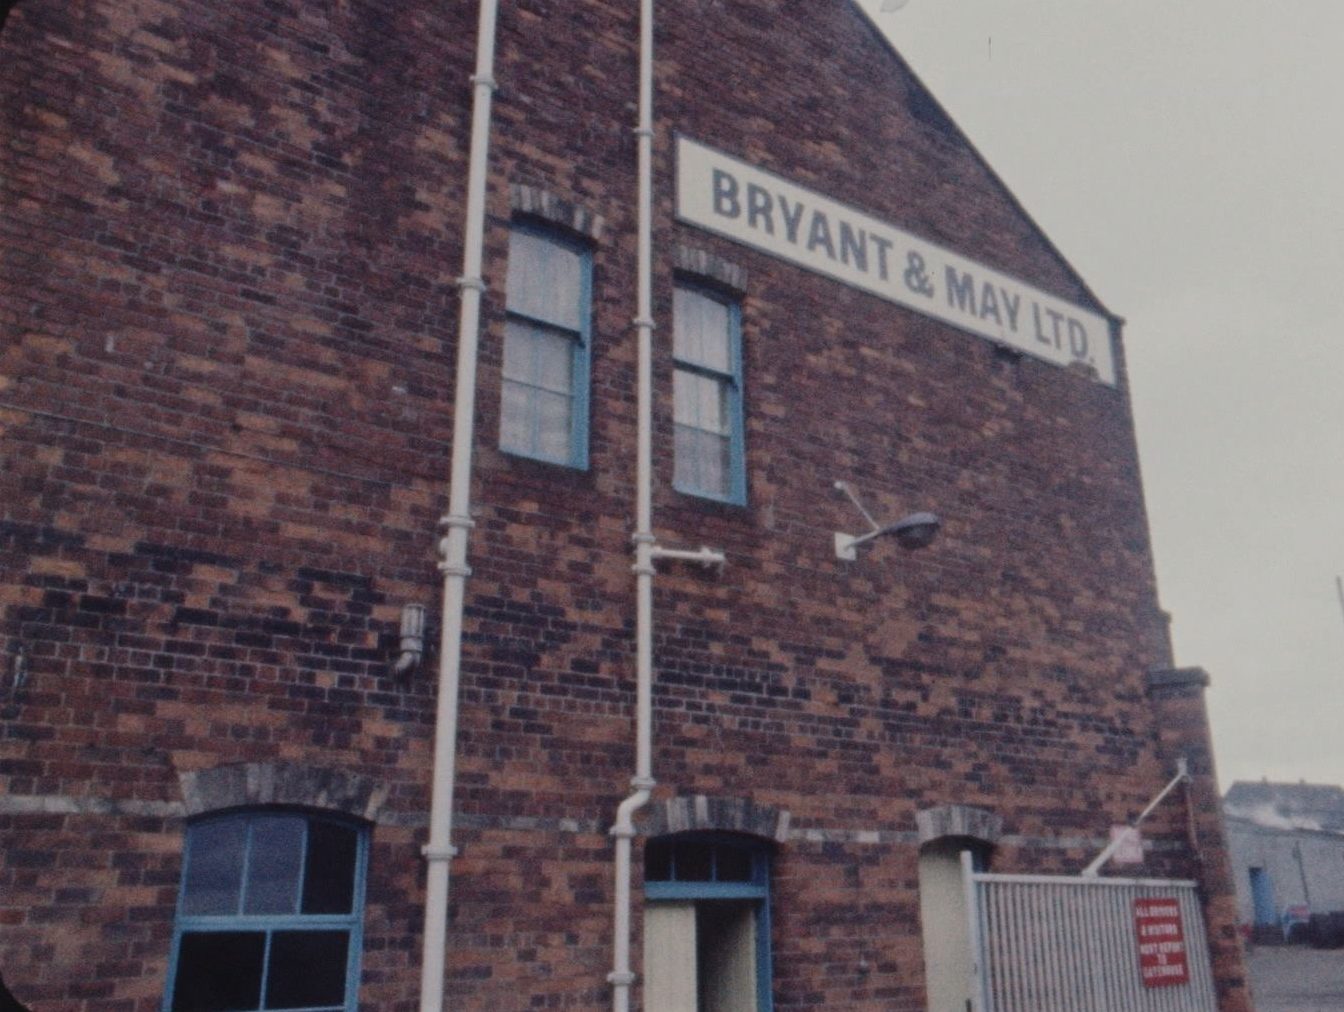 Bryant and May was once Britain’s leading manufacturers of matches.